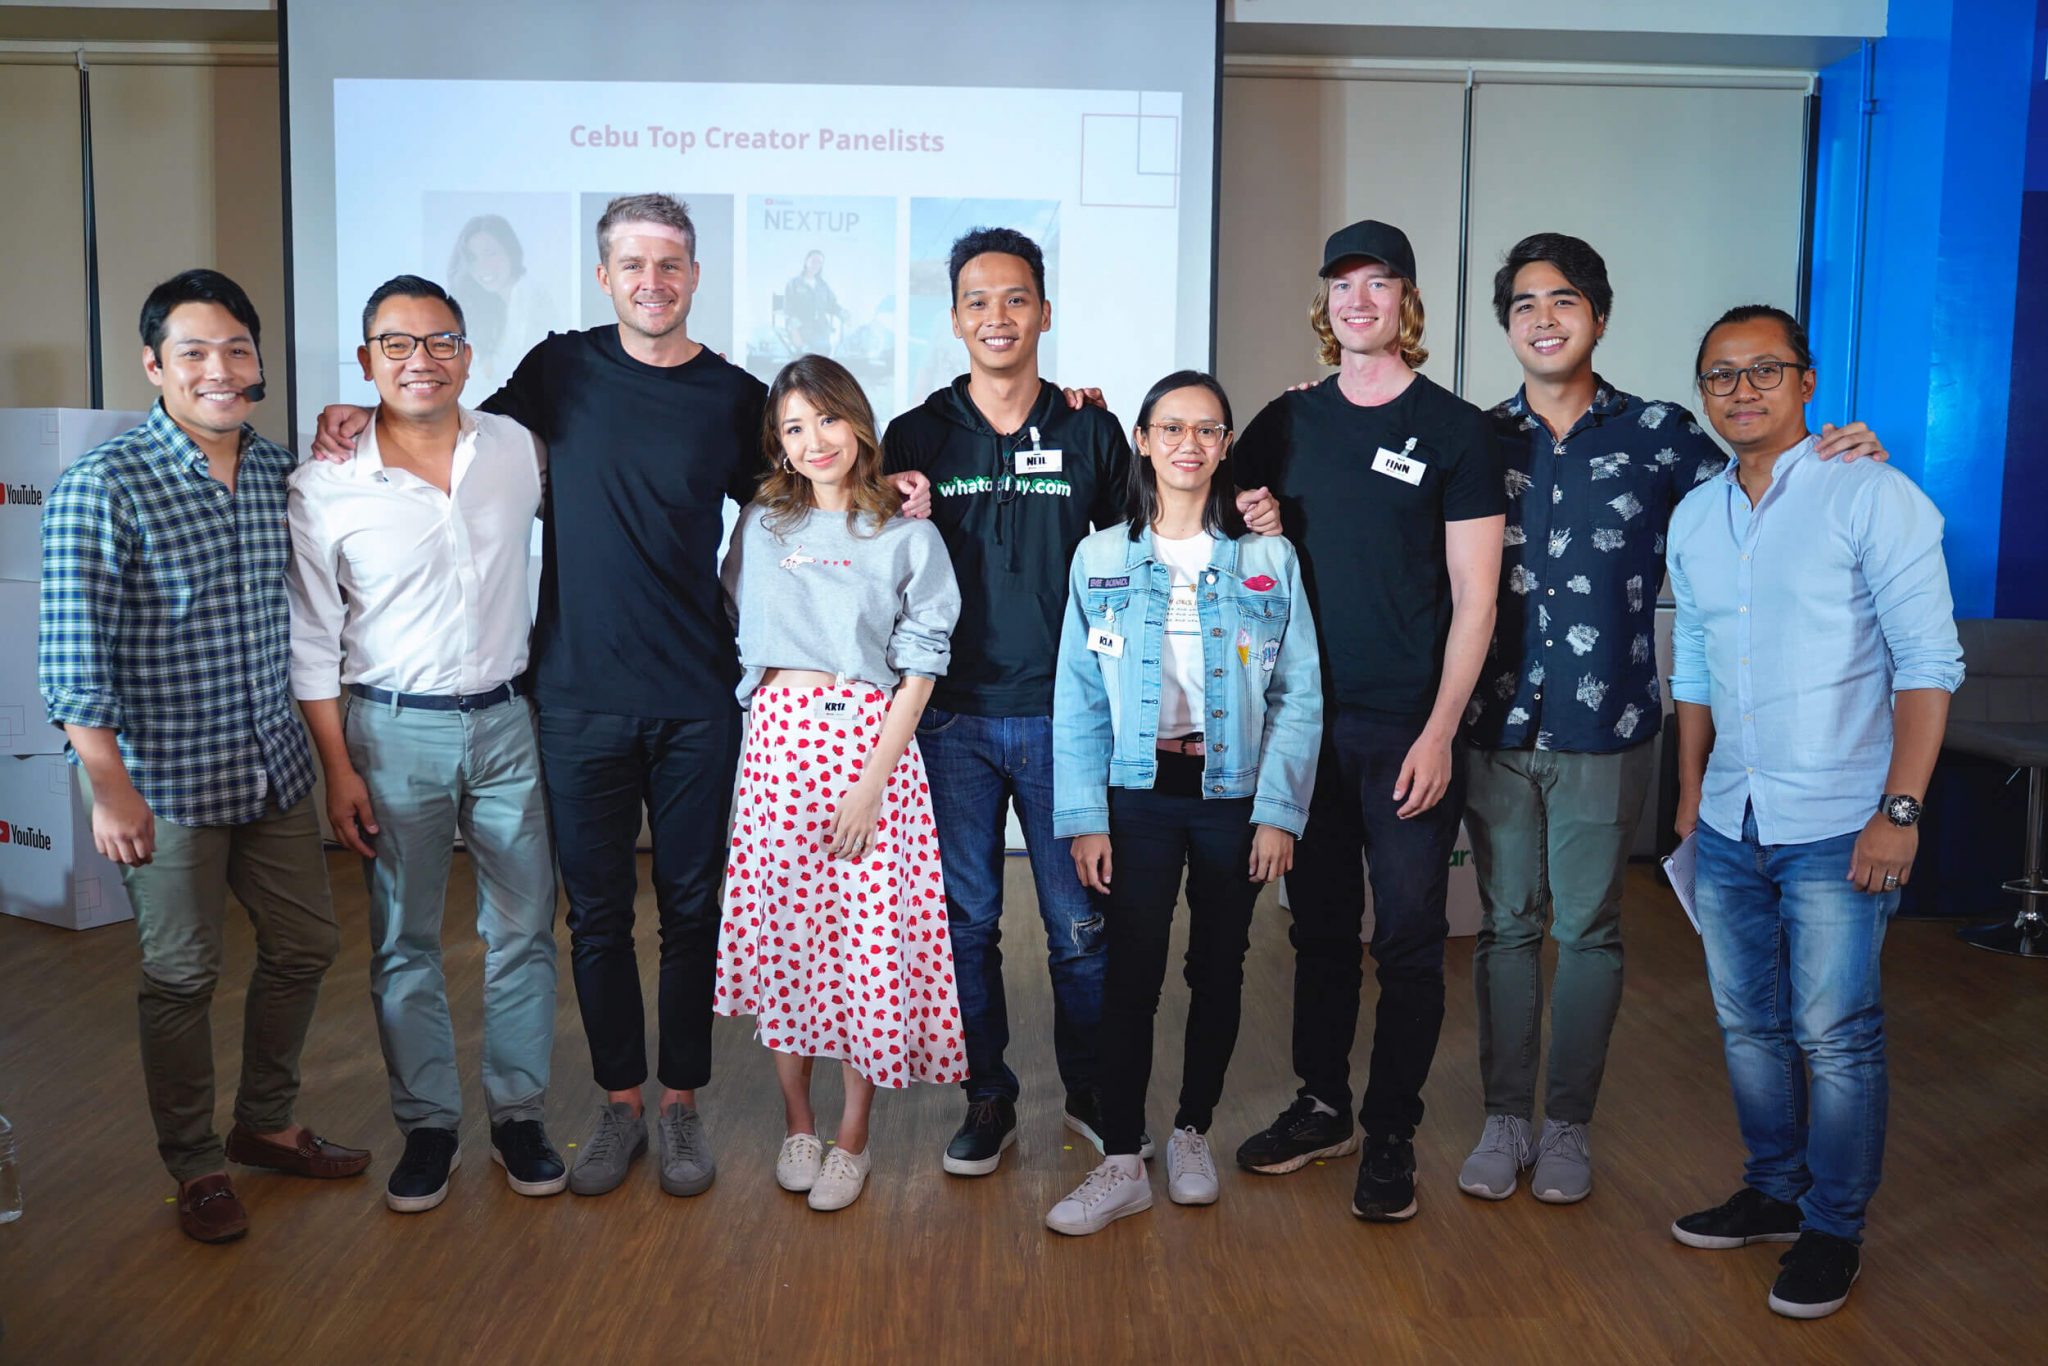 A Partnership for Inclusive Creator Development in the Philippines. (L-R) Jako De Leon of PaperbugTV; Gerard Milan, VP and Head of Prepaid Marketing for Smart; Chris Klapwijk, Creator and Artist Development Manager for YouTube Philippines, Malaysia, & ANZ; Kryz Uy, fashion & lifestyle vlogger; Neil Yamit, Co-founder of Whatoplay; Rea Ninja, 2019 YouTube NextUp finalist and a career and BPO training tips creator; FinnSnow, Icelandic travel vlogger based in Cebu; Enrique Cuunjieng, Strategic Partner Manager, YouTube Creator & Artist Development, Philippines; and Blake Sarion of Beyond Reviews, and President and CEO of Sarion Films. 